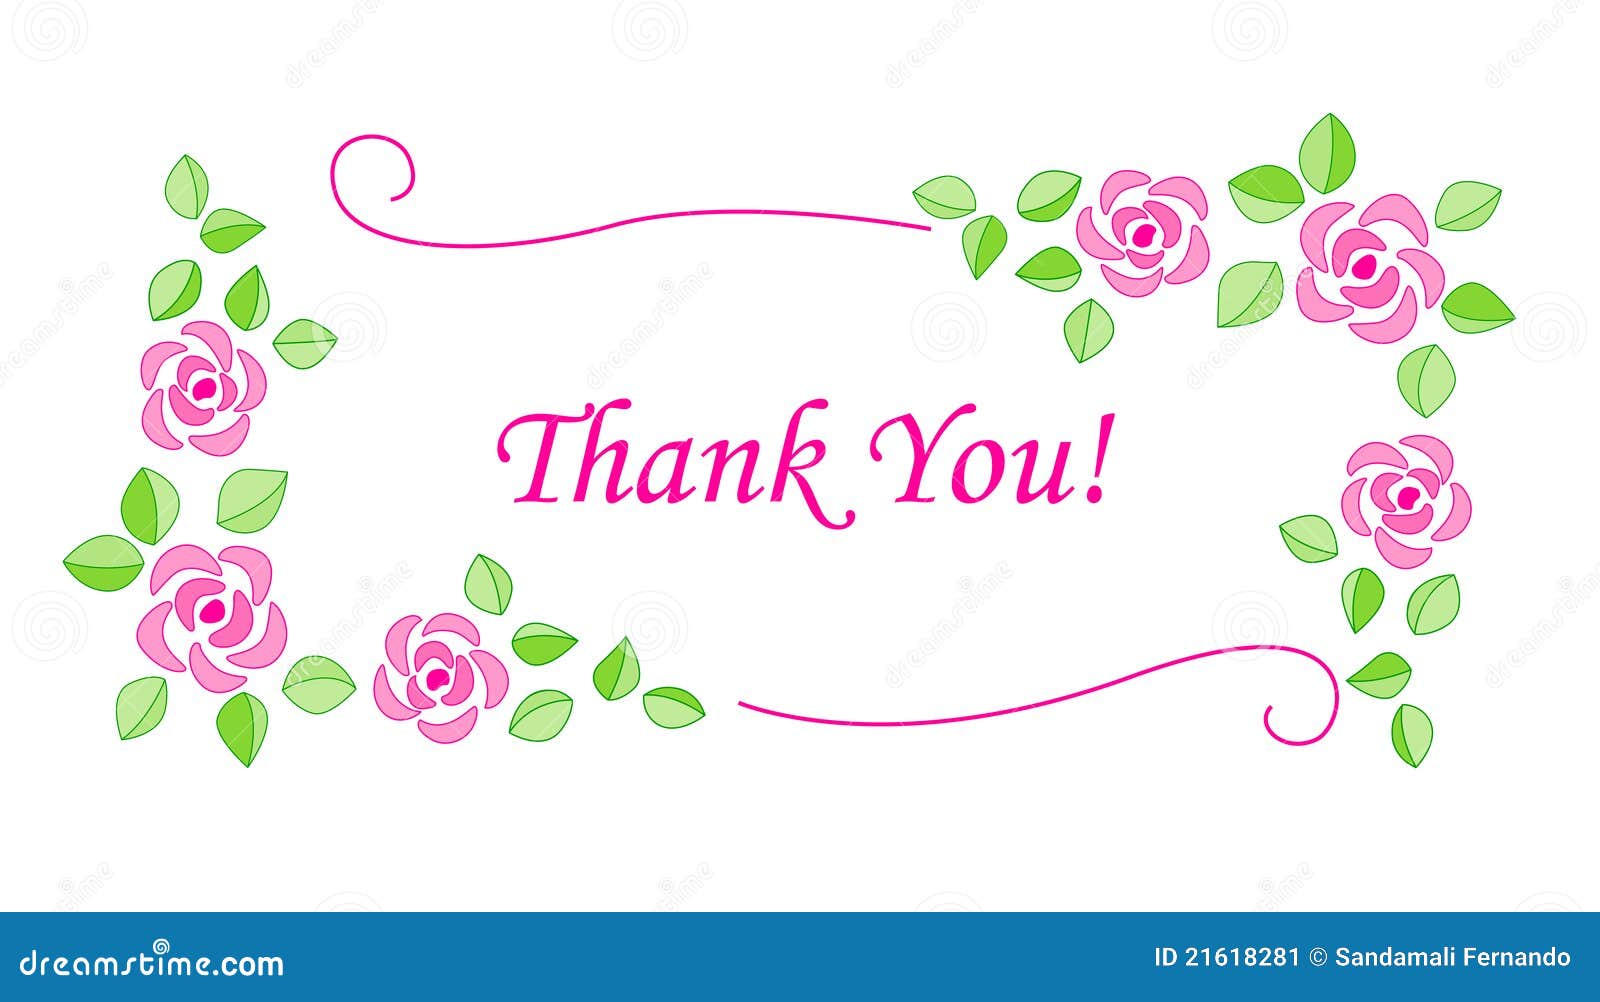 clip art for thank you with flowers - photo #47